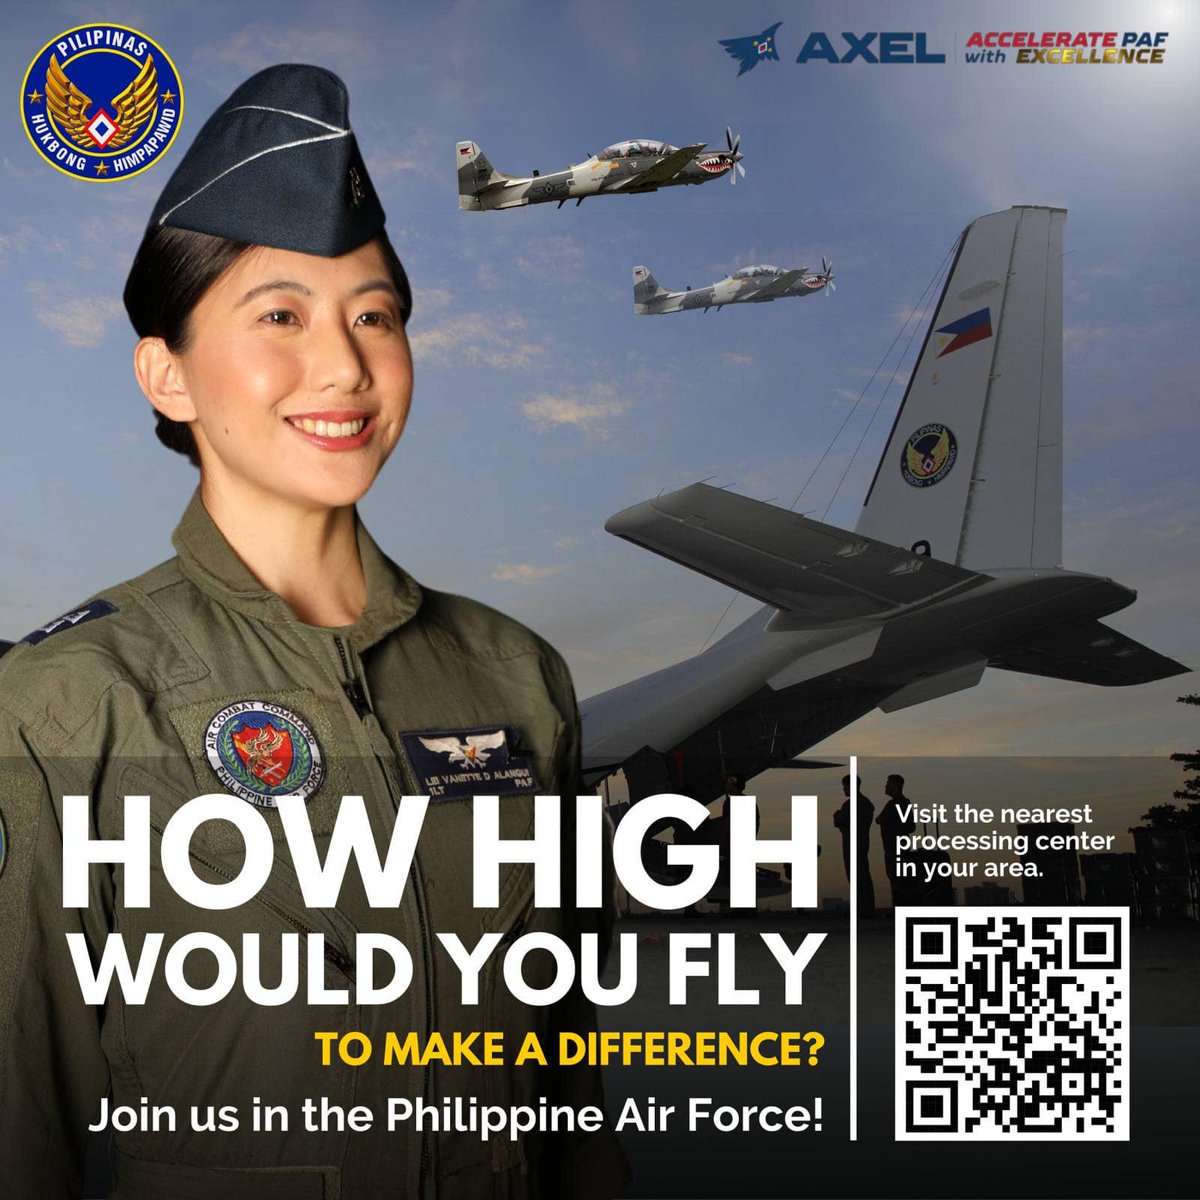 Join us and become one of the dedicated airmen of the Philippine Air Force.
For more details, kindly visit this link:
me-qr.com/OAAskkJr
#AcceleratewithExcellence #GuardiansofourPreciousSkies #PAFyoucanTrust #AFPyoucanTrust #StrongAirForceStrongPHILIPPINES